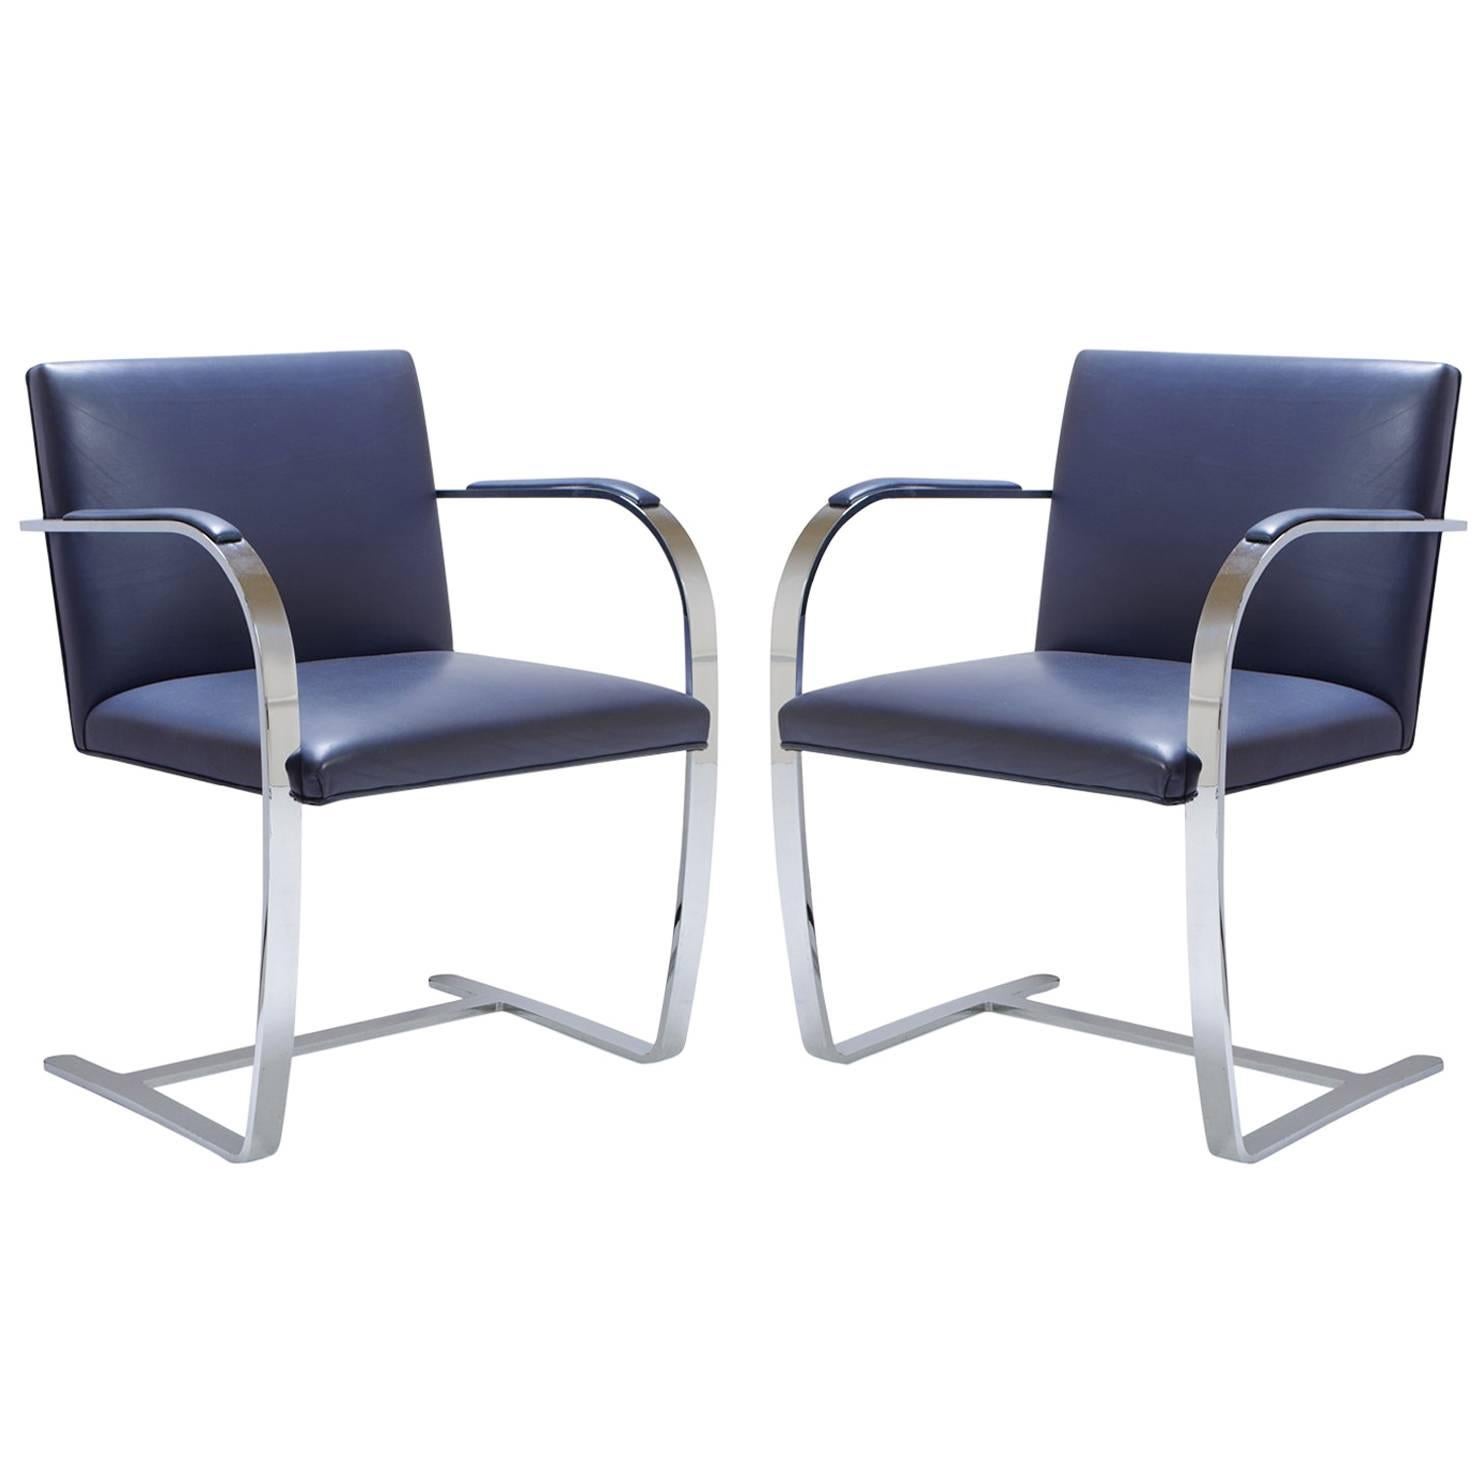 Mies Van Der Rohe for Knoll Brno Flat-Bar Chairs in Navy Leather, Pair